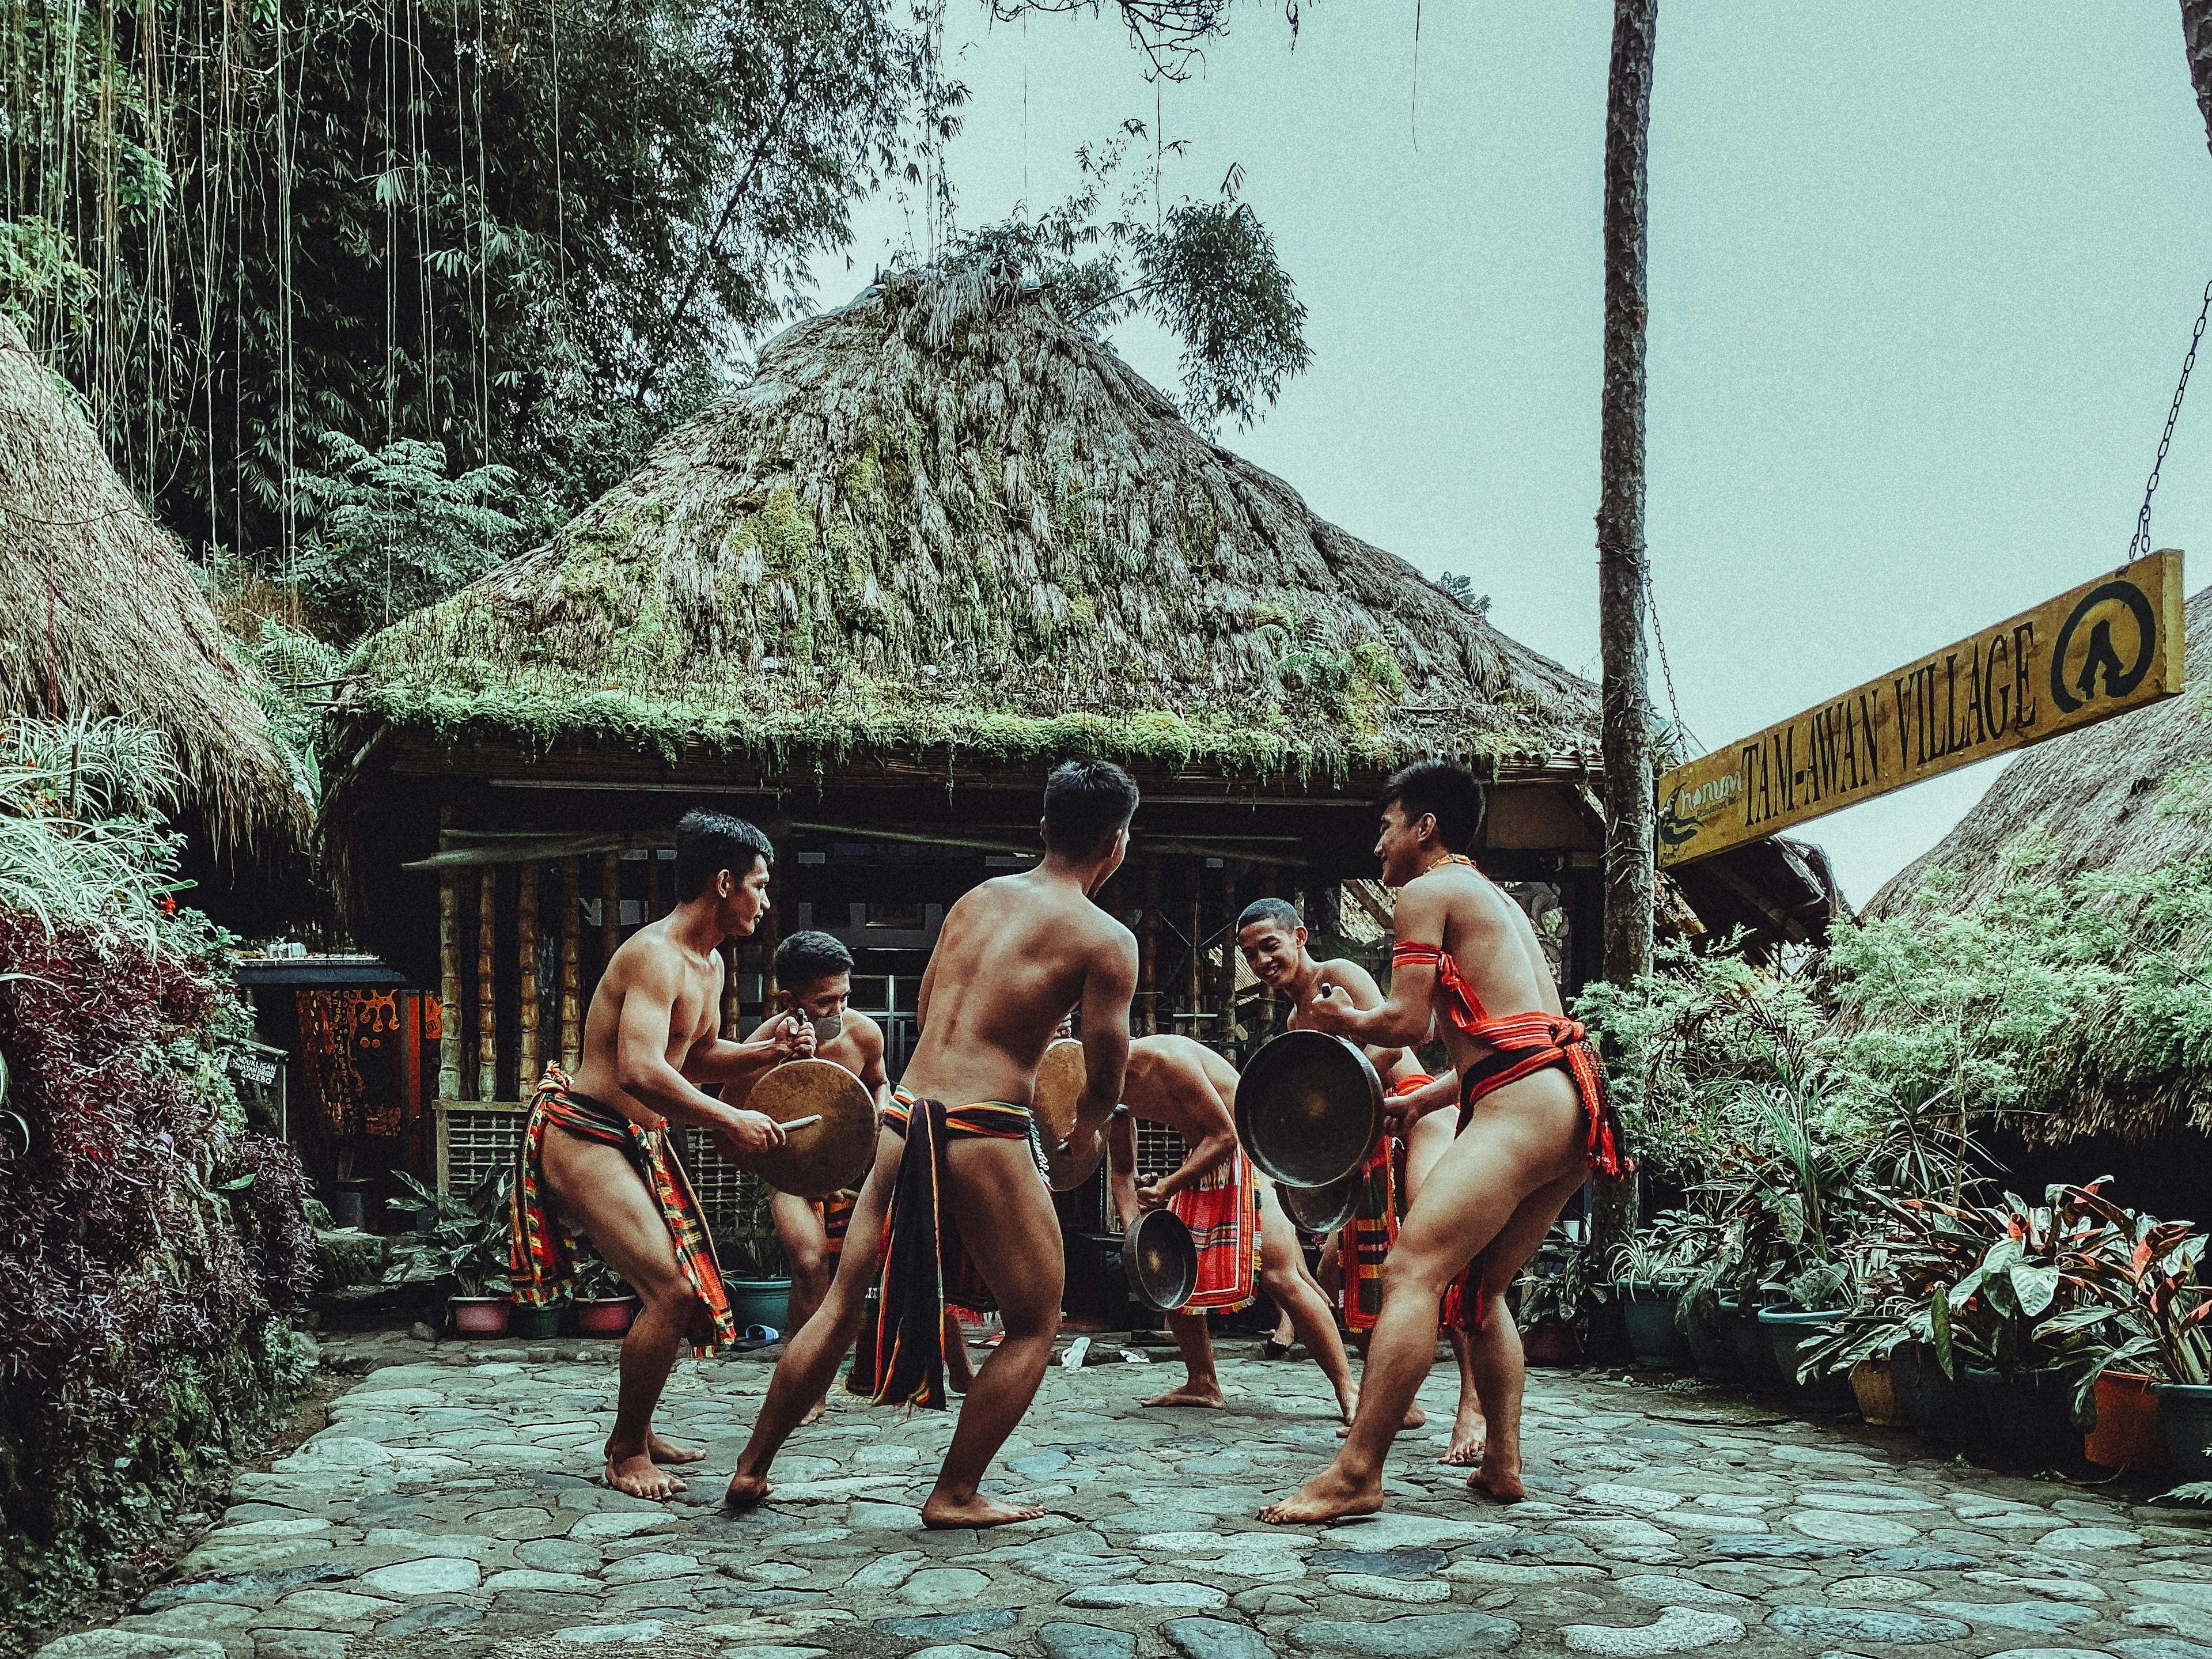 Local tribe dancing in costumes in Tam-awan Village in Benguet, Philippines.